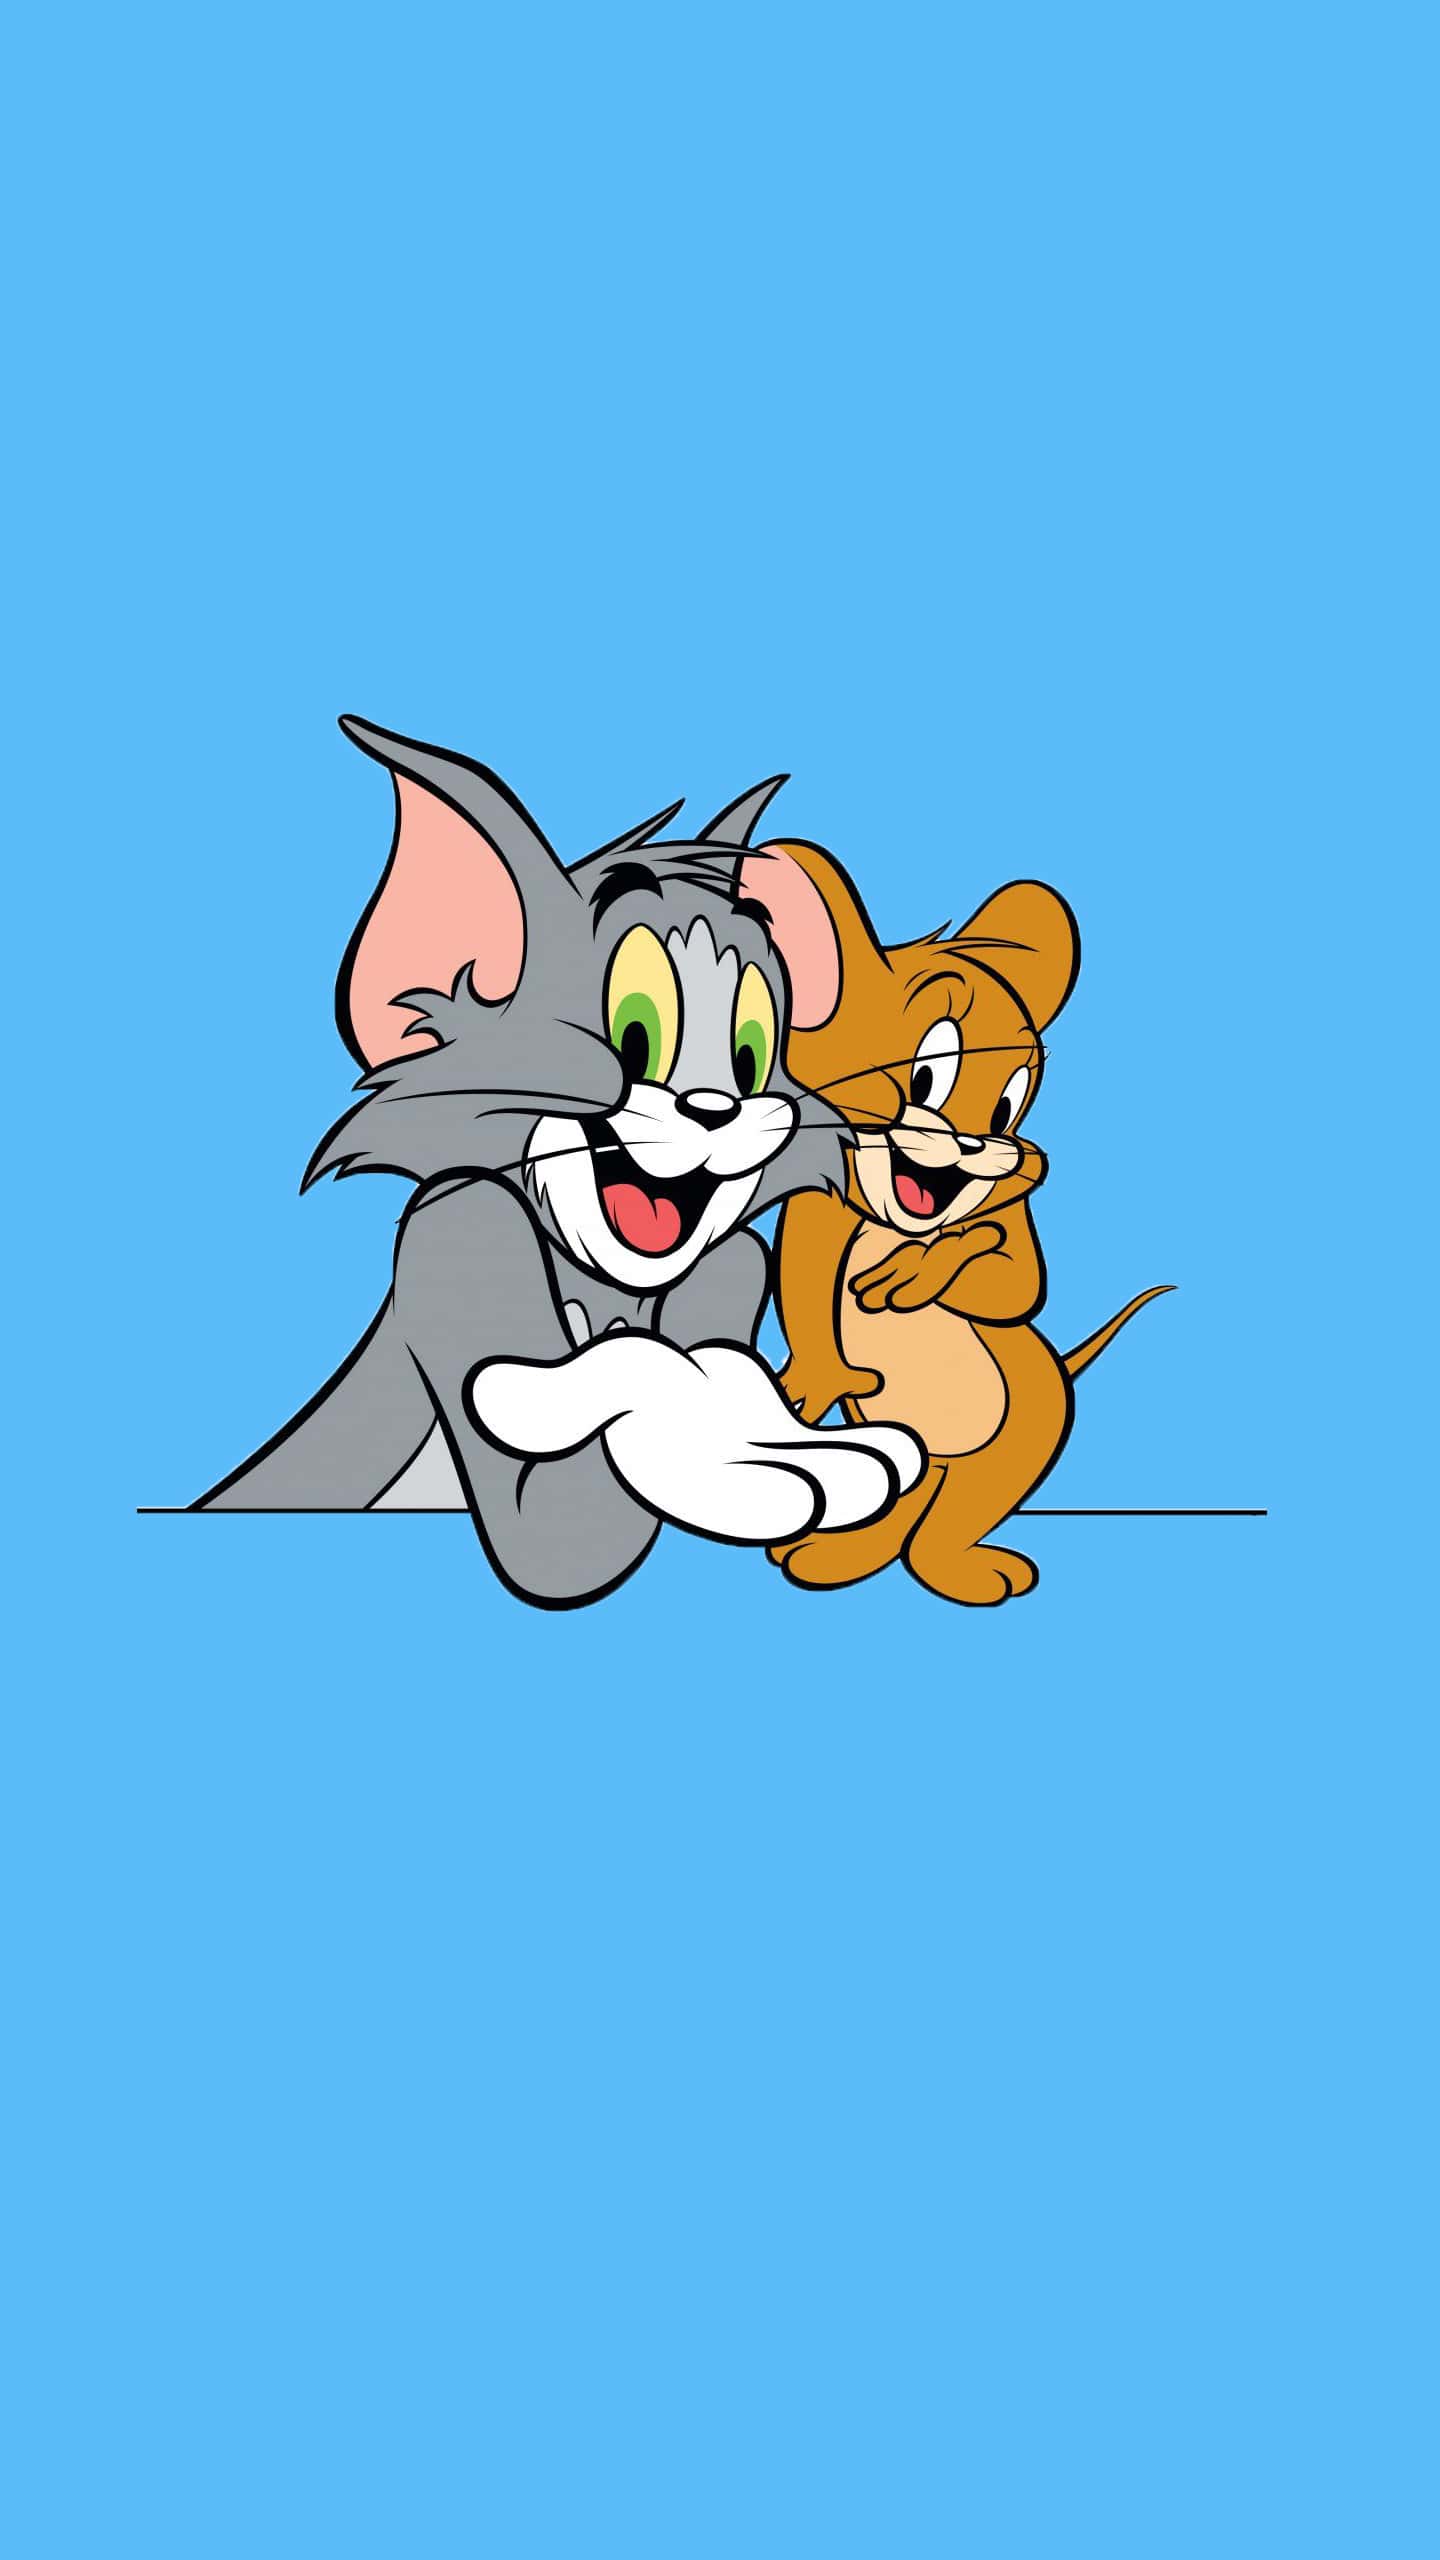 Free Tom And Jerry Wallpaper Downloads 200 Tom And Jerry Wallpapers for  FREE  Wallpaperscom